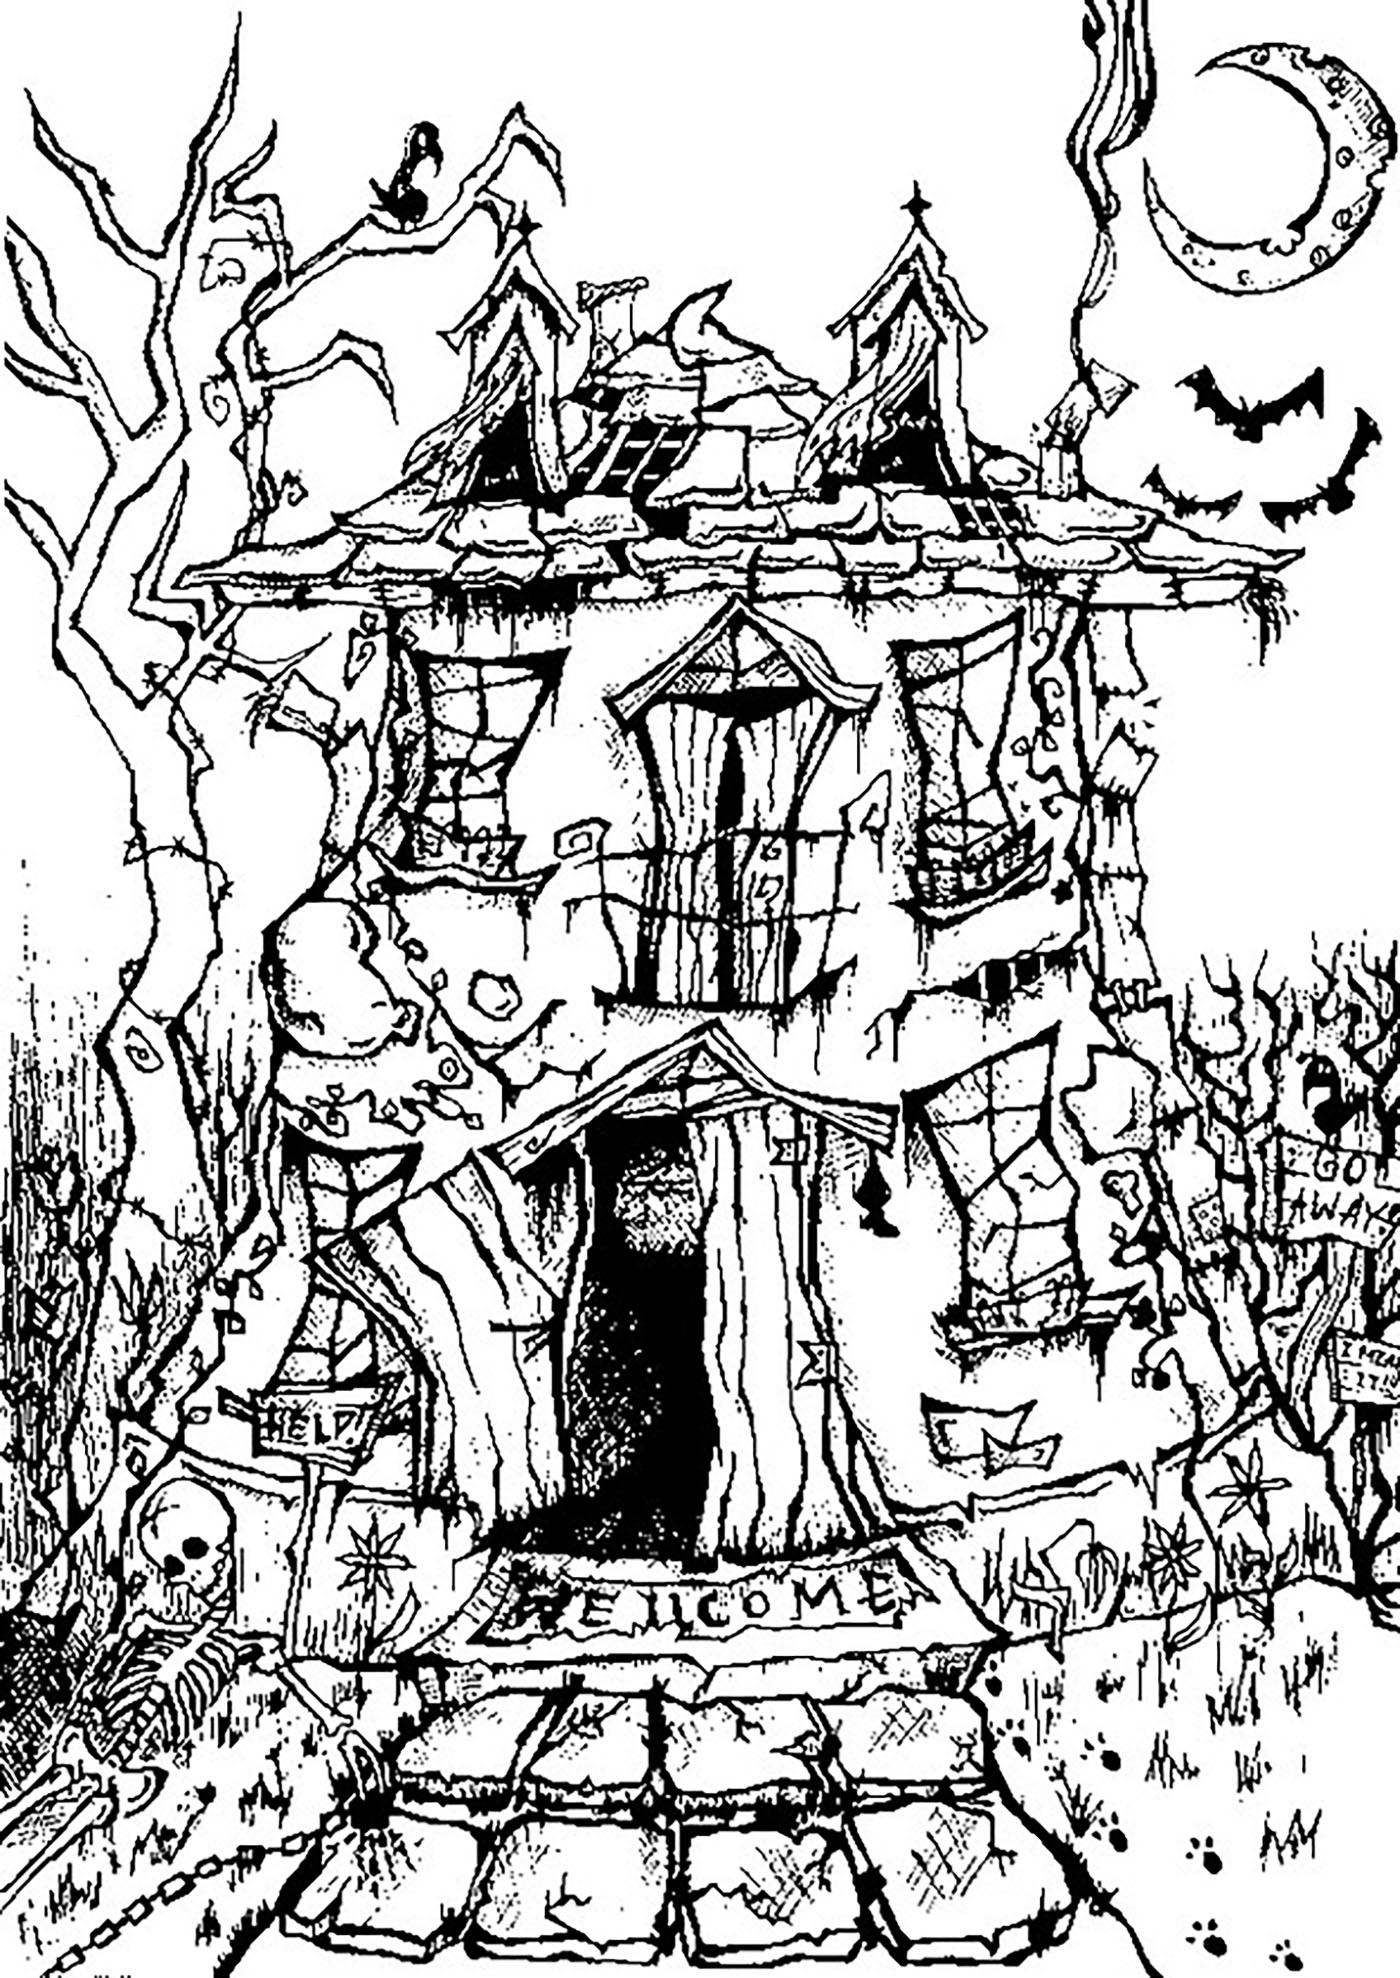 Horror Coloring Pages For Adults
 Halloween haunted house Halloween Adult Coloring Pages